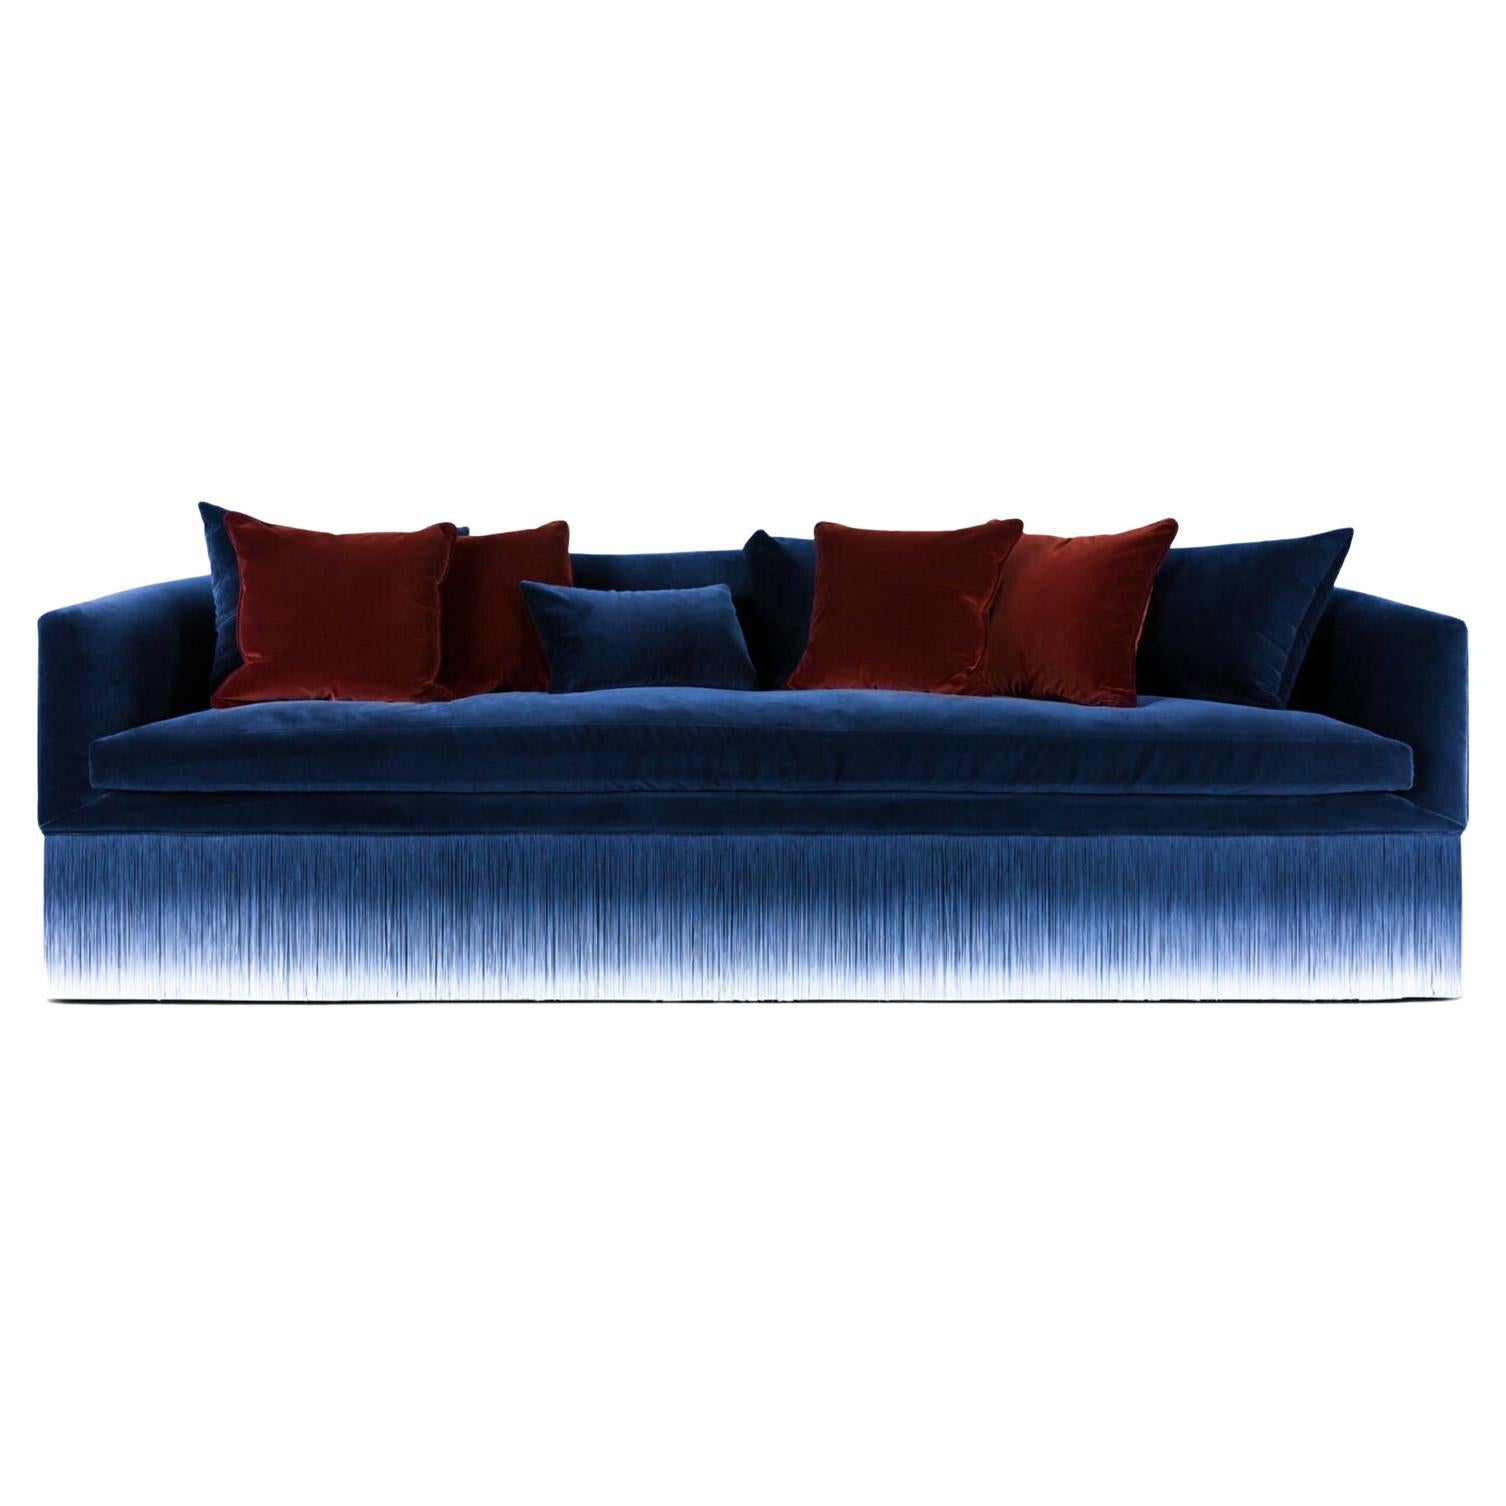 Moooi Amami Sofa with Fringes in Blue Upholstery by Lorenza Bozzoli For Sale